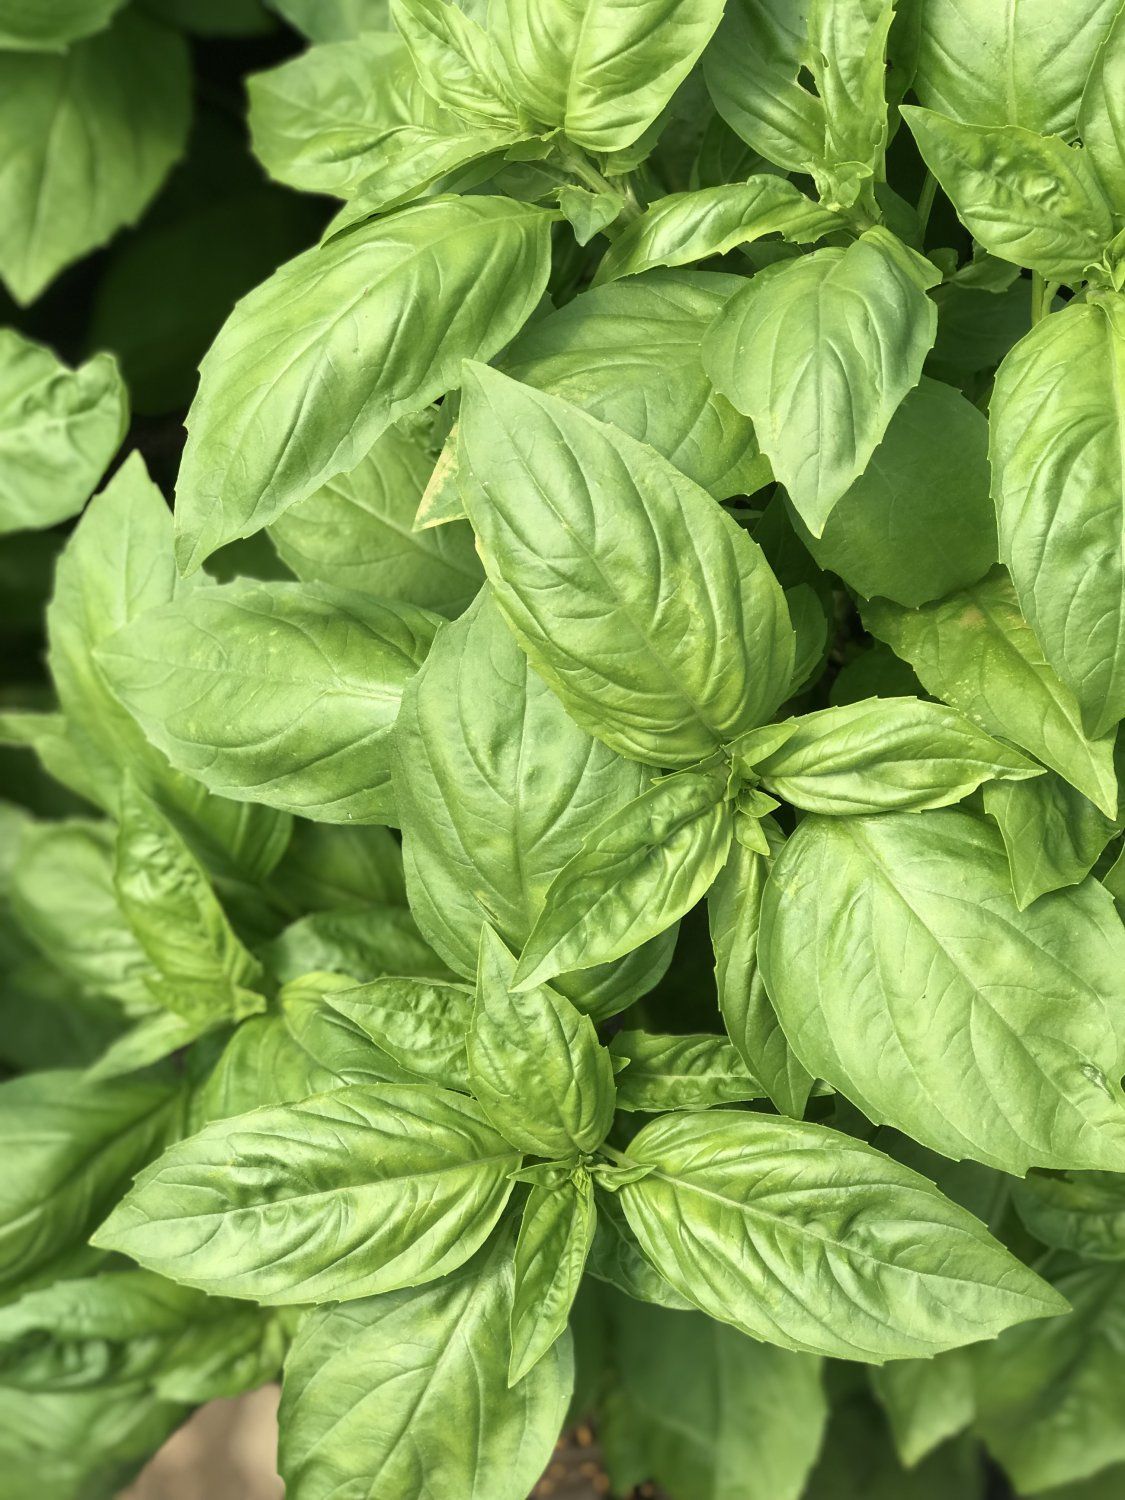 Next Happening: For the love of Basil